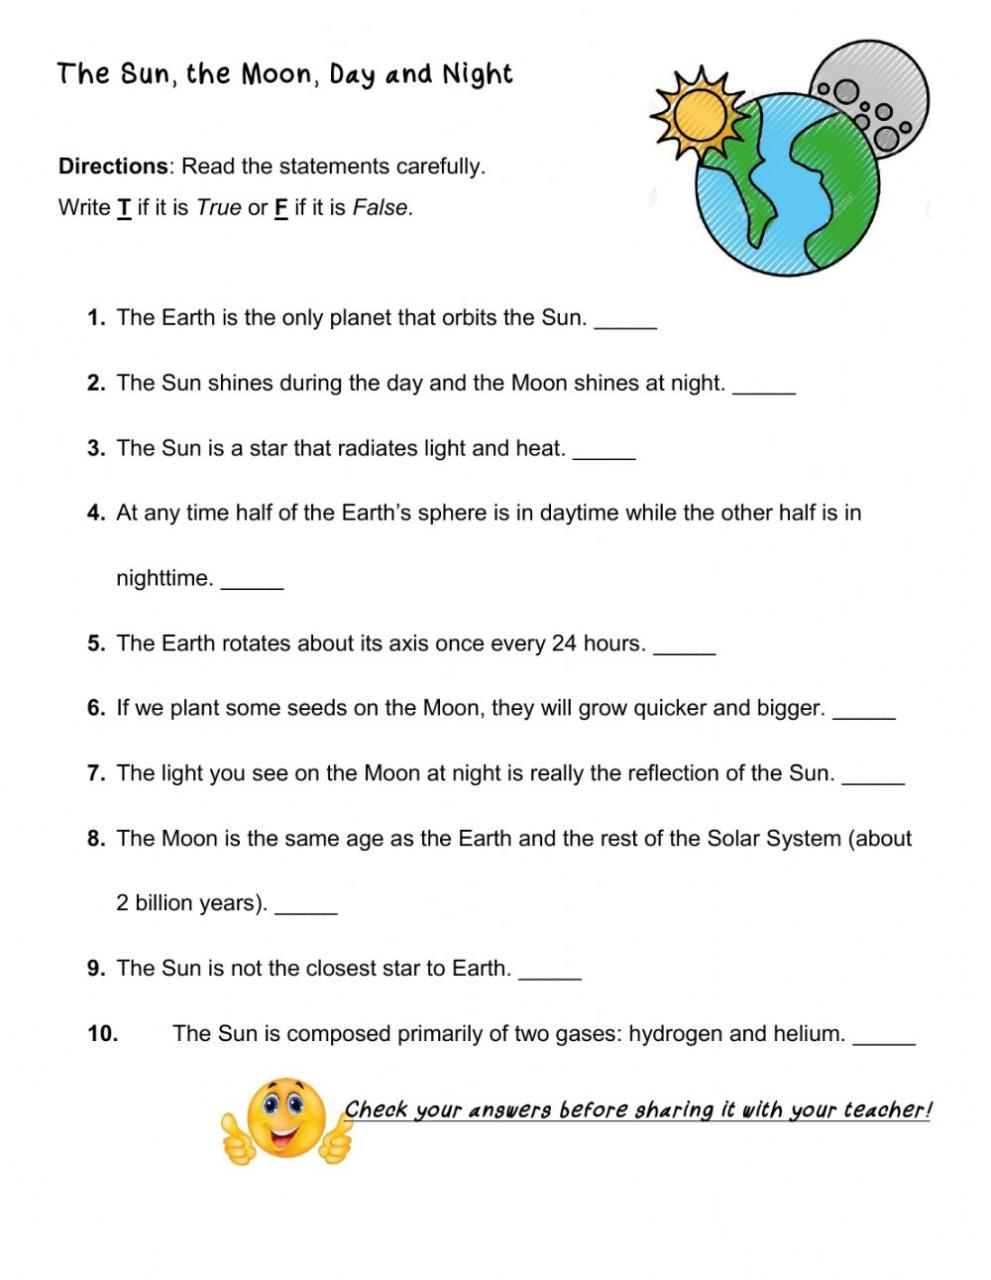 The Sun, The Moon, Day and Night worksheet